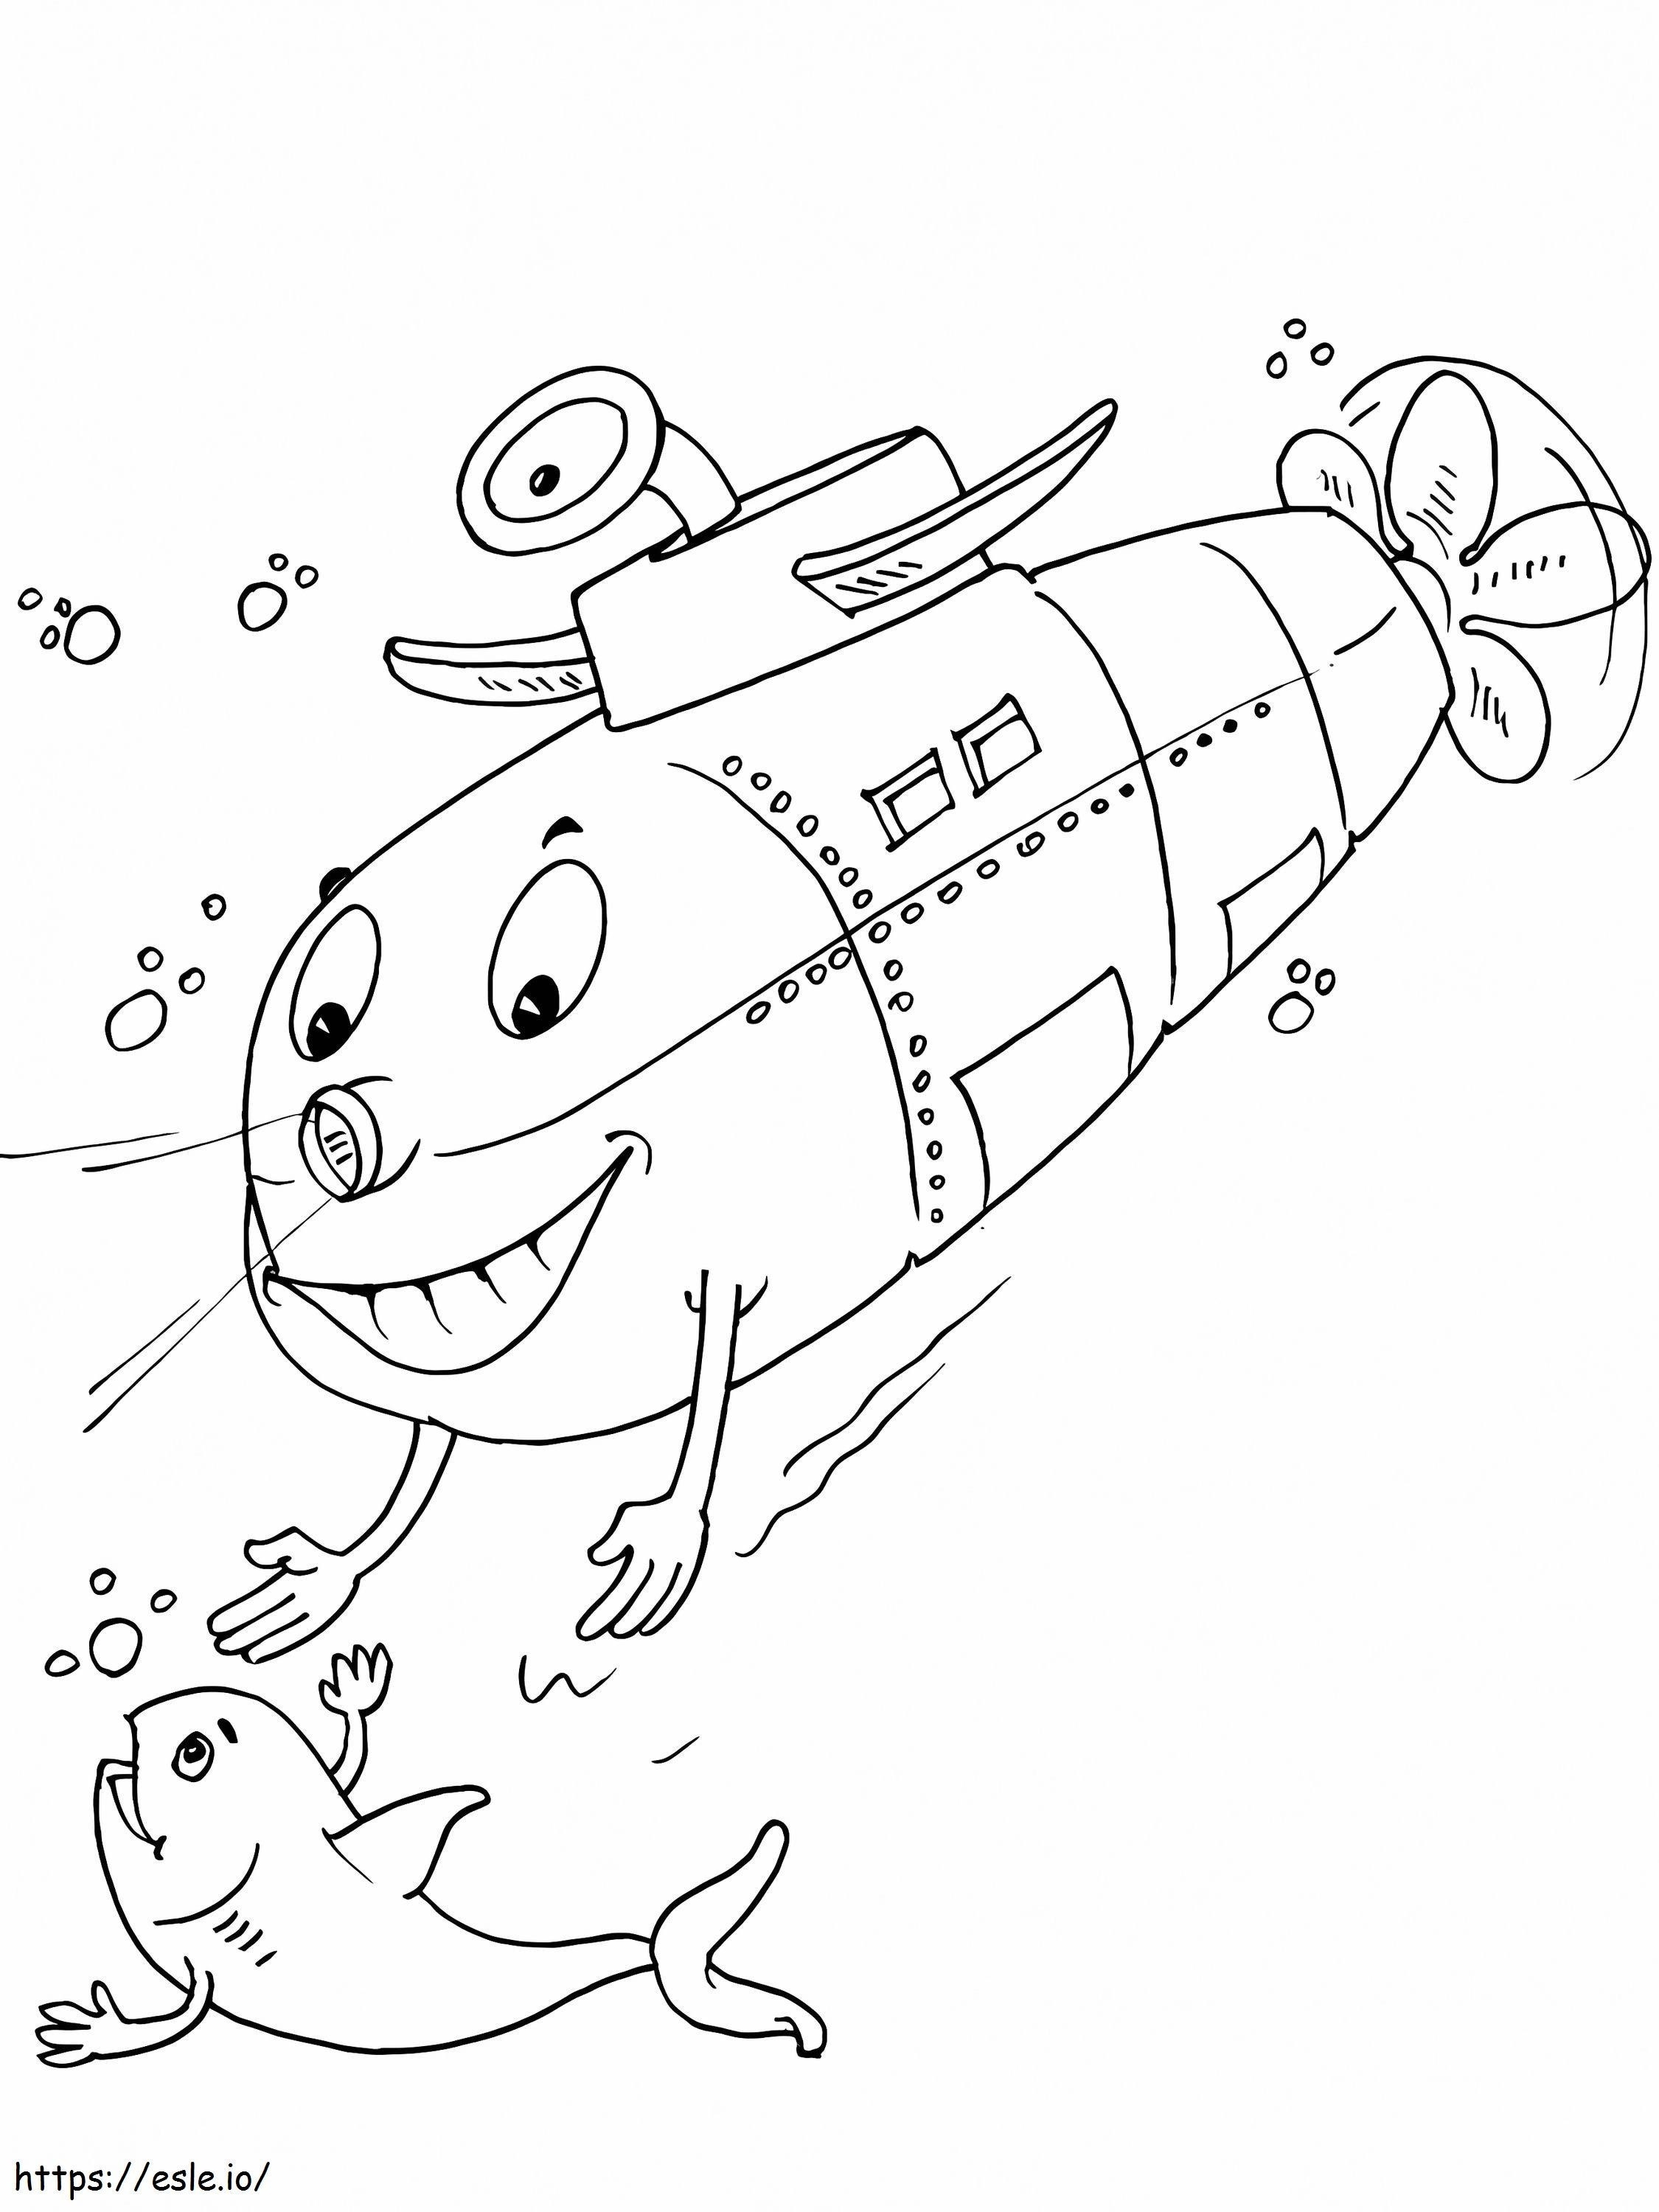 A Submarine And Underwater Life coloring page